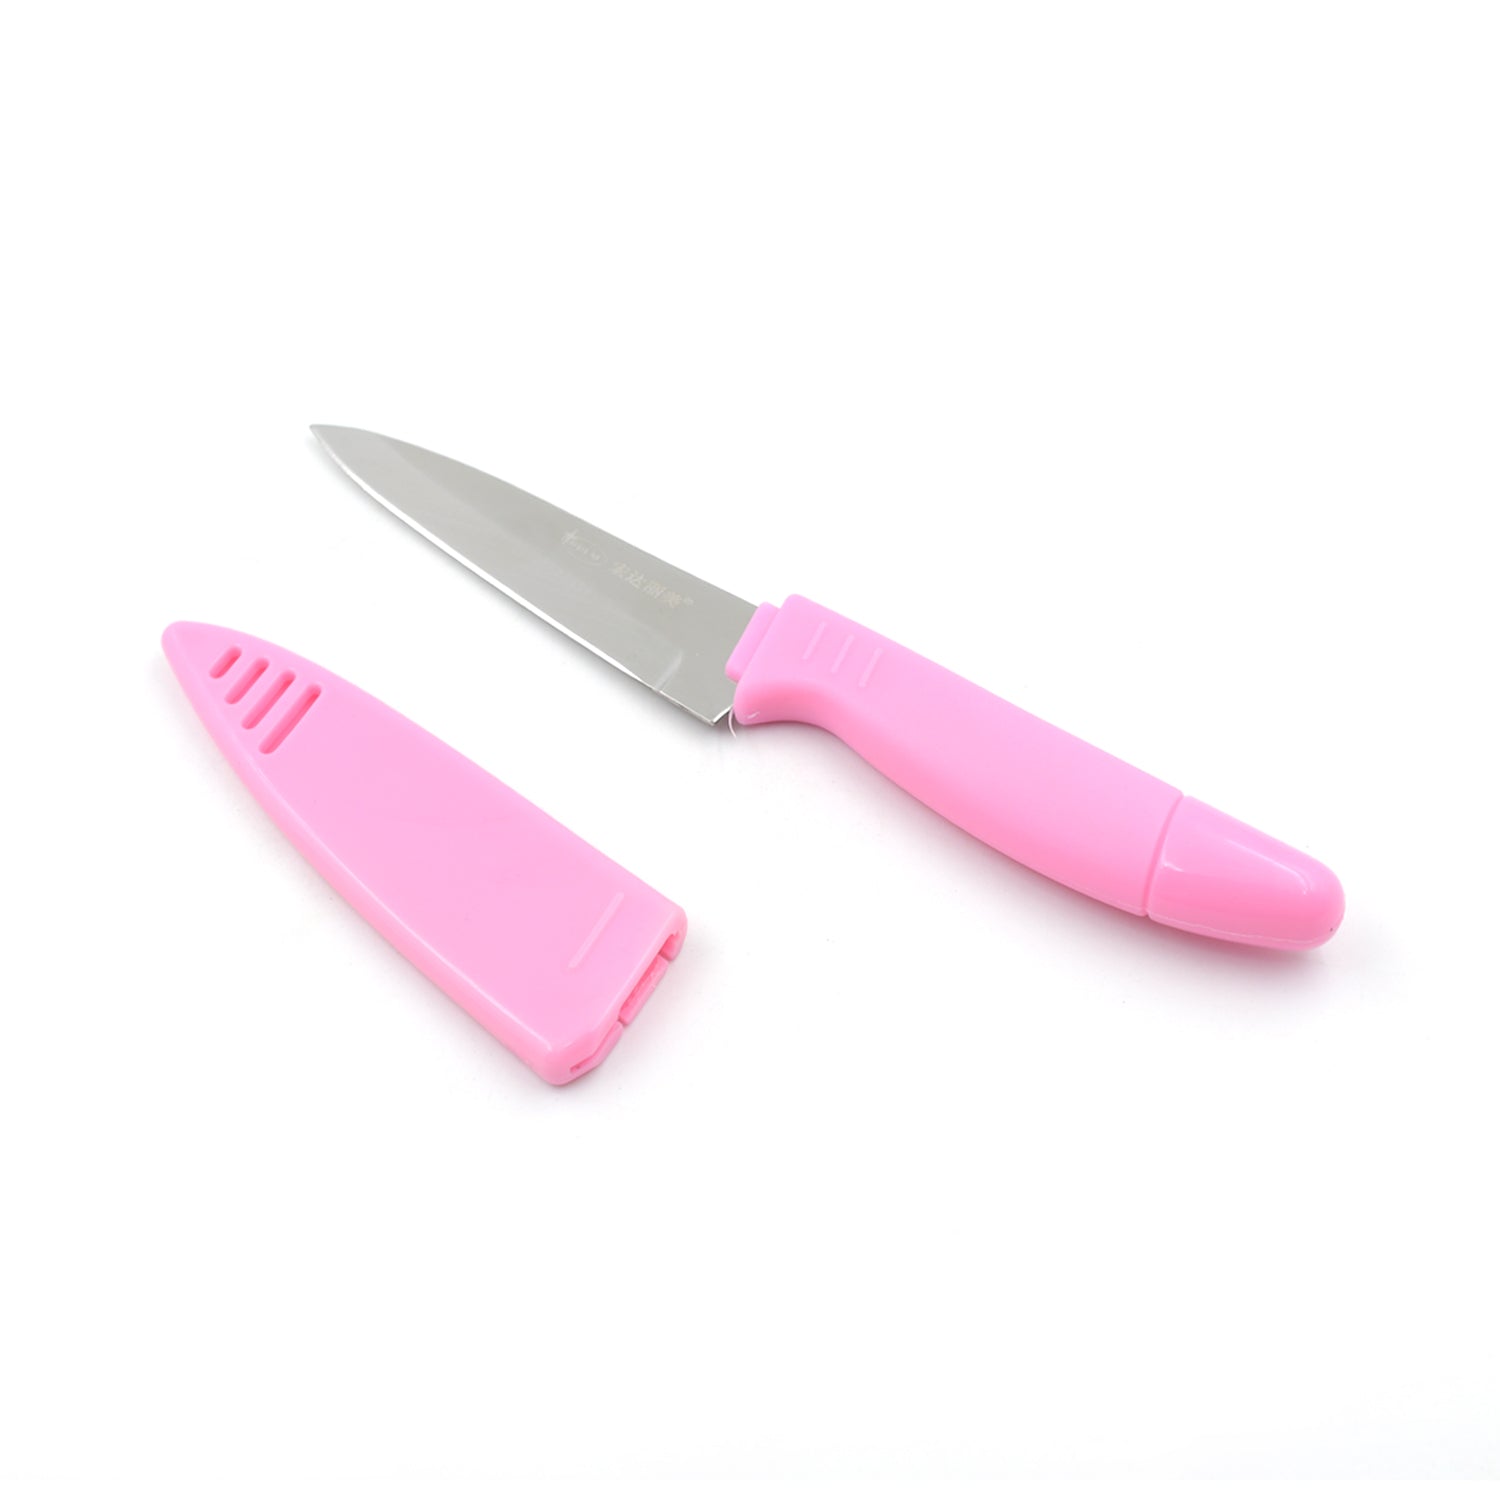 5838 Stainless Steel Fruit Knife, New Sharp and Durable Fruit Knife Small, Comfortable Non-slip Handle, with Protective Cover, Suitable for Most Types of Vegetables and Fruits(1 Pc)